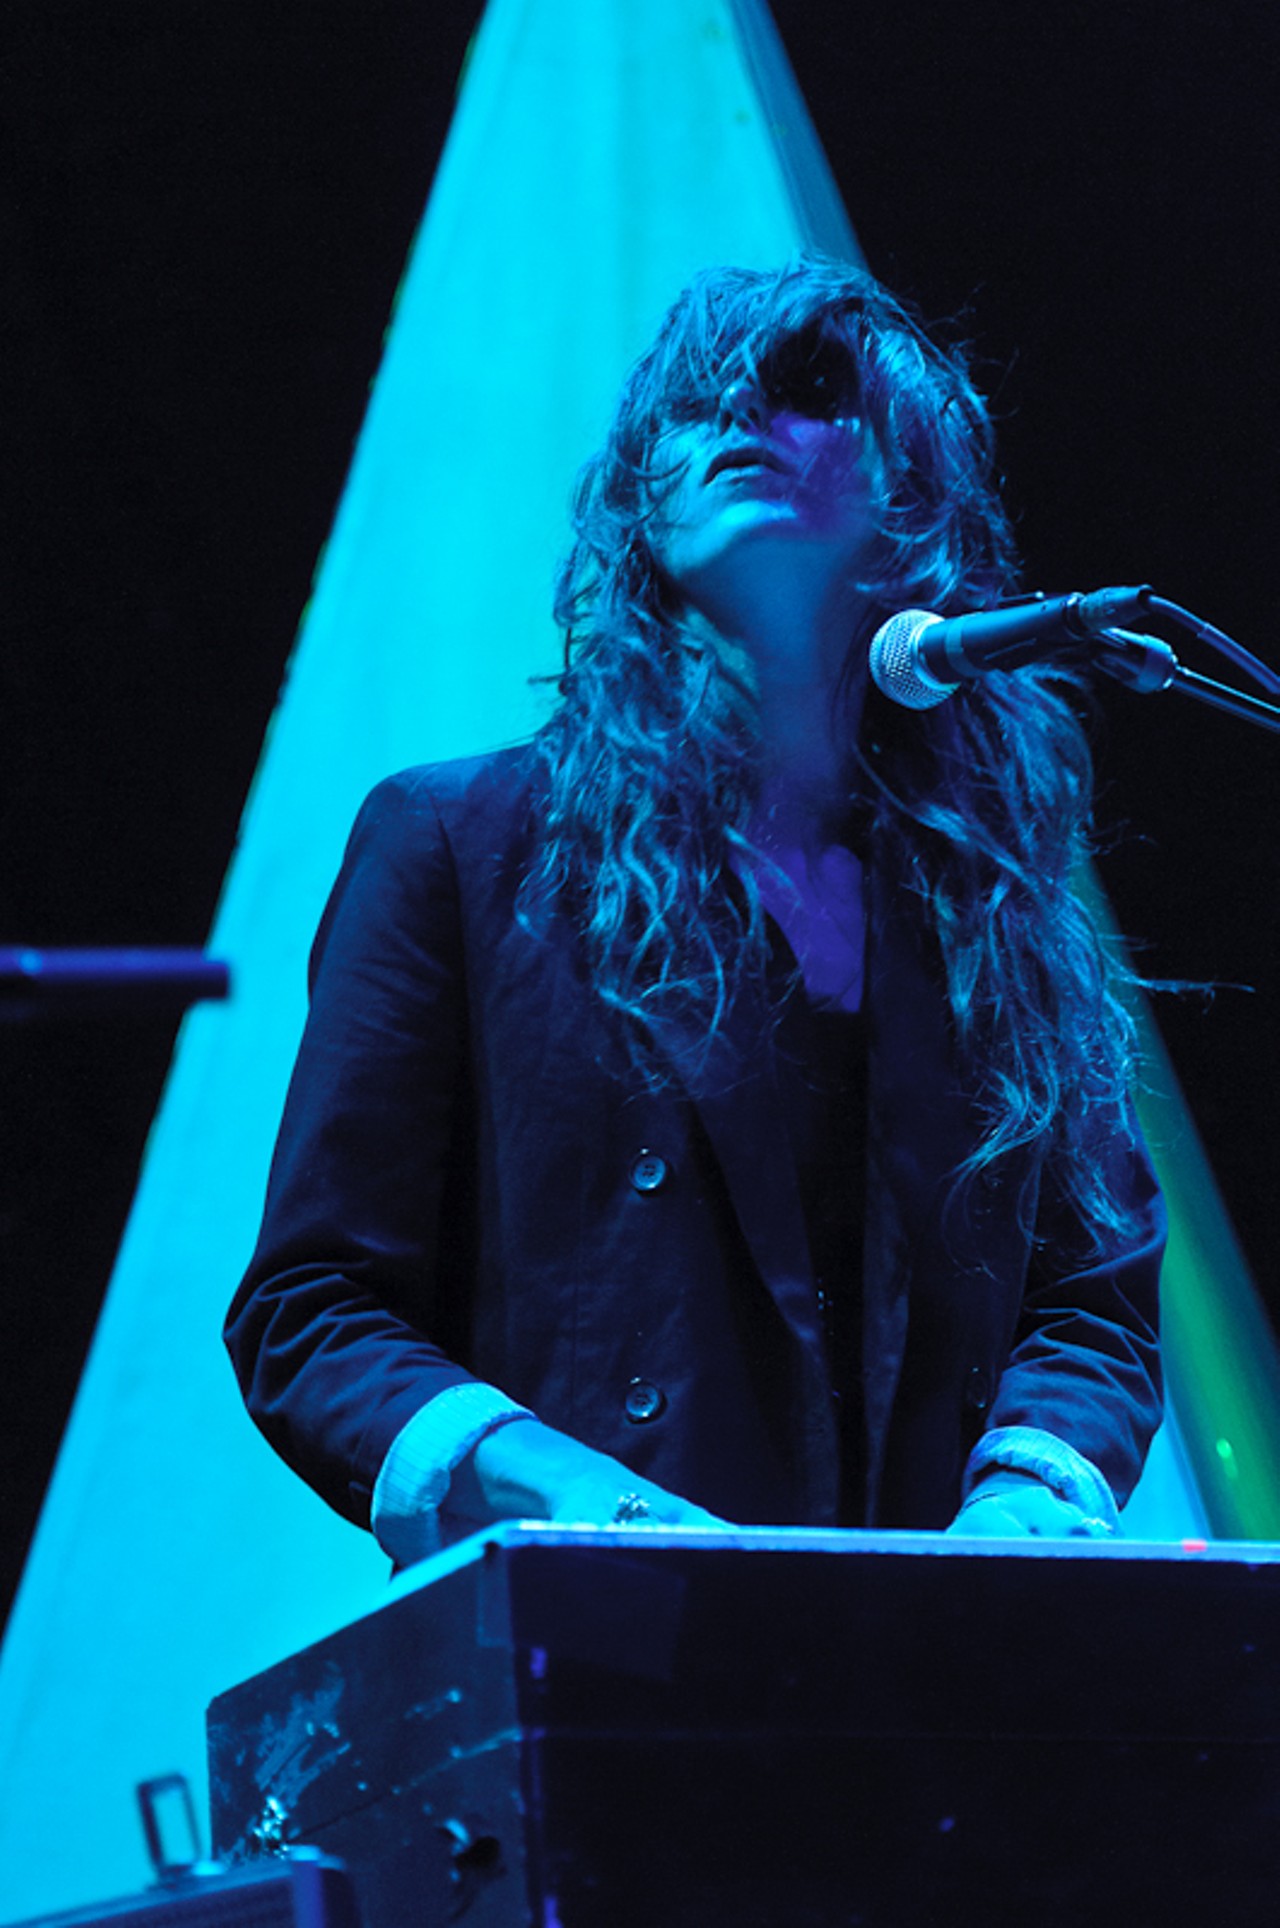 Beach House, opening for Vampire Weekend at Chaifetz Arena.